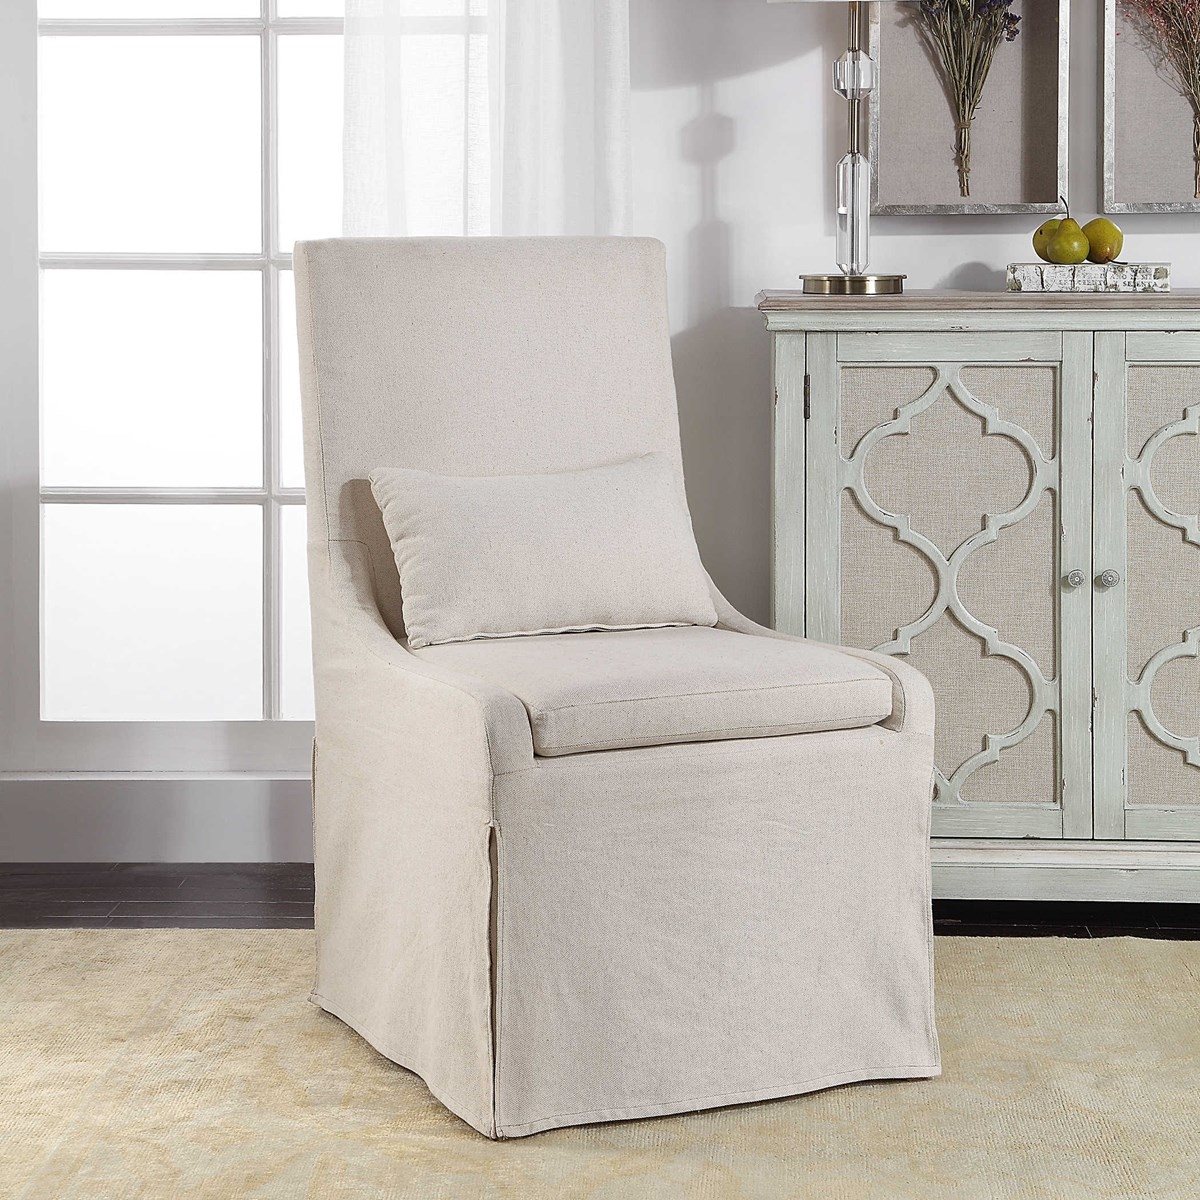 Coley Armless Chair - Image 1